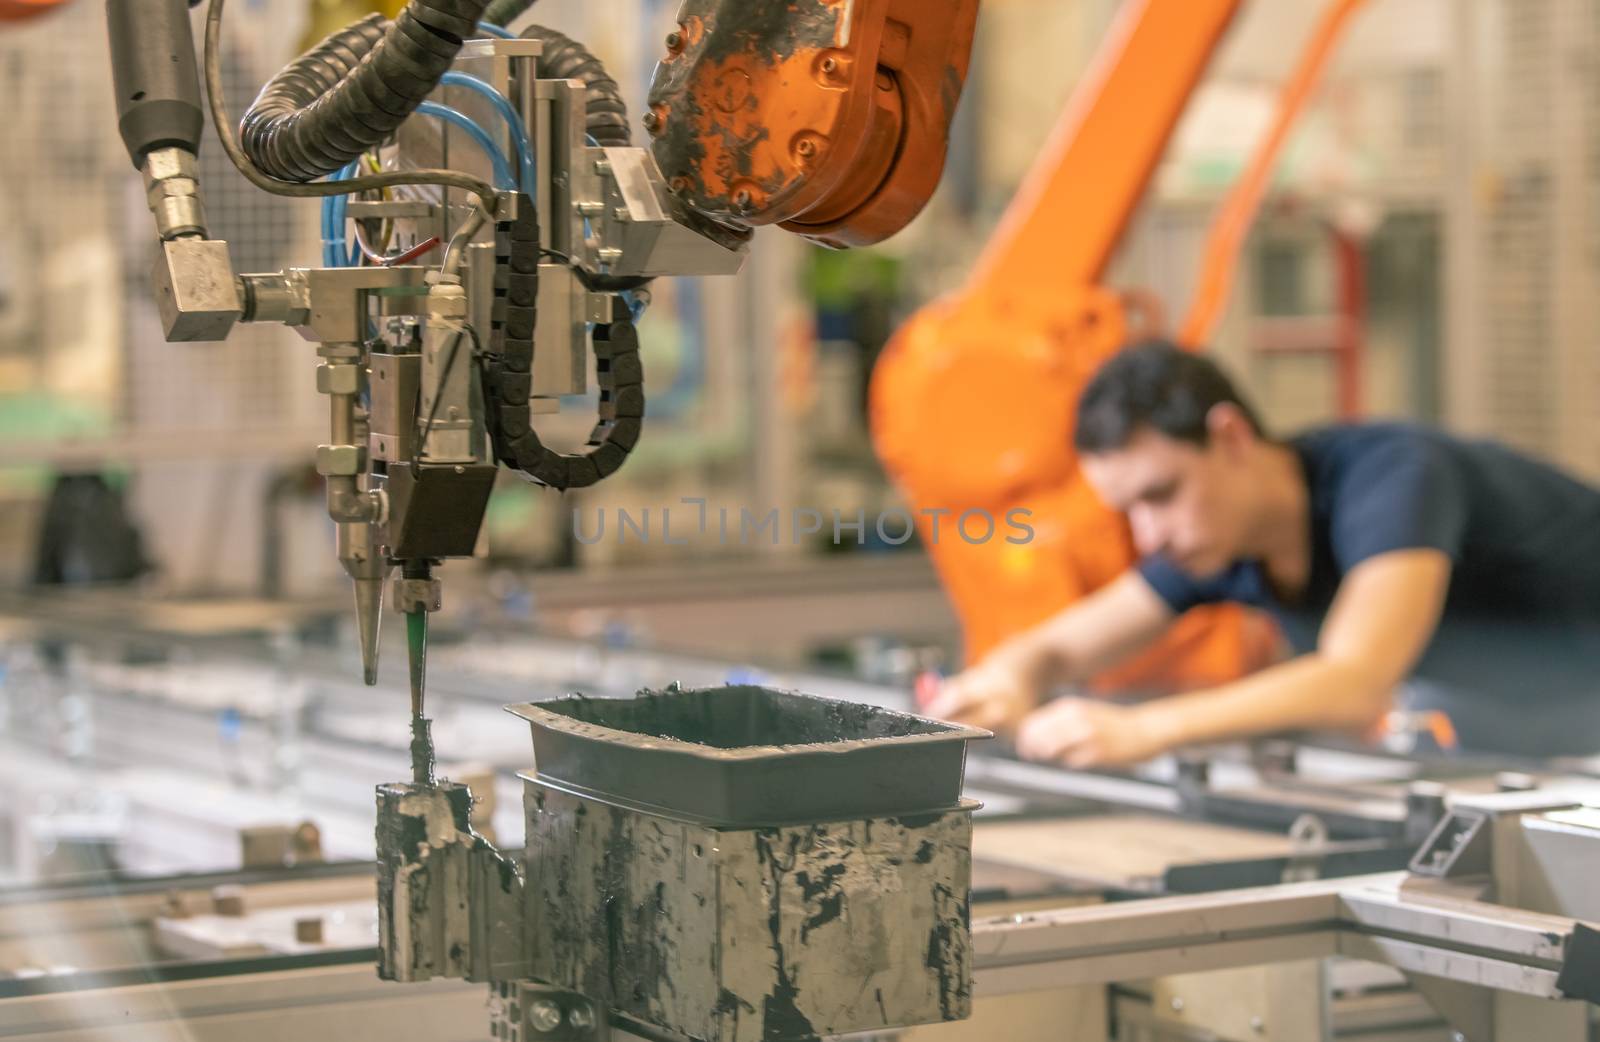 installation of new robot arms in the factory for modernization of production. Blurred by Edophoto